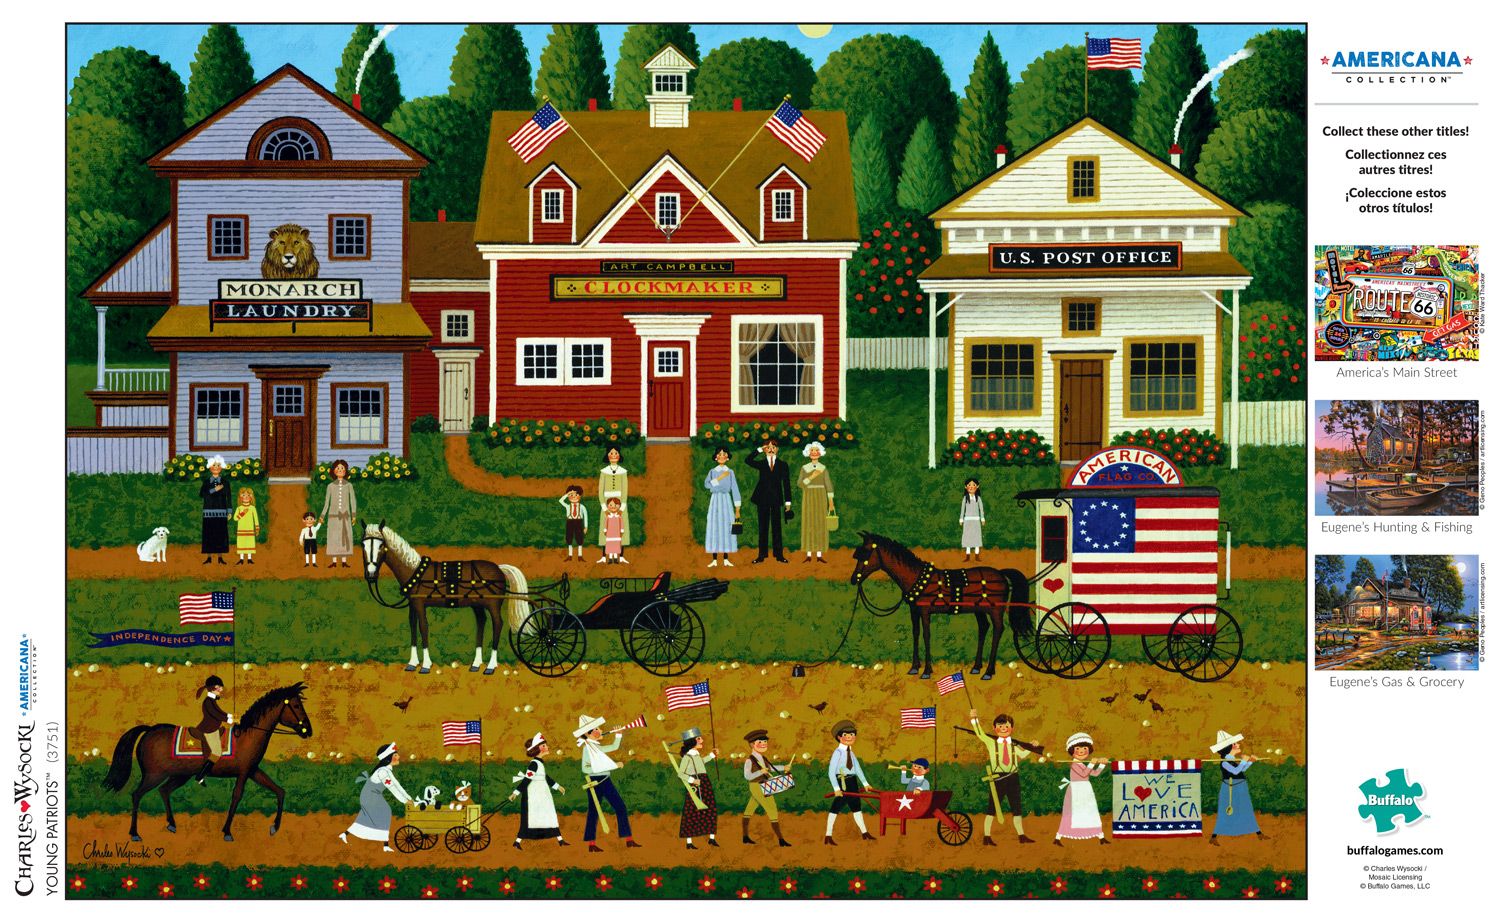 [RDY] [送料無料] Buffalo Games Charles Wysocki Americana Collection - Young Patriots - 500 Pieces Jigsaw Puzzle [楽天海外通販] | Buffalo Games Charles Wysocki Americana Collection - Young Patriots - 500 Pieces Jigsaw Puzzle